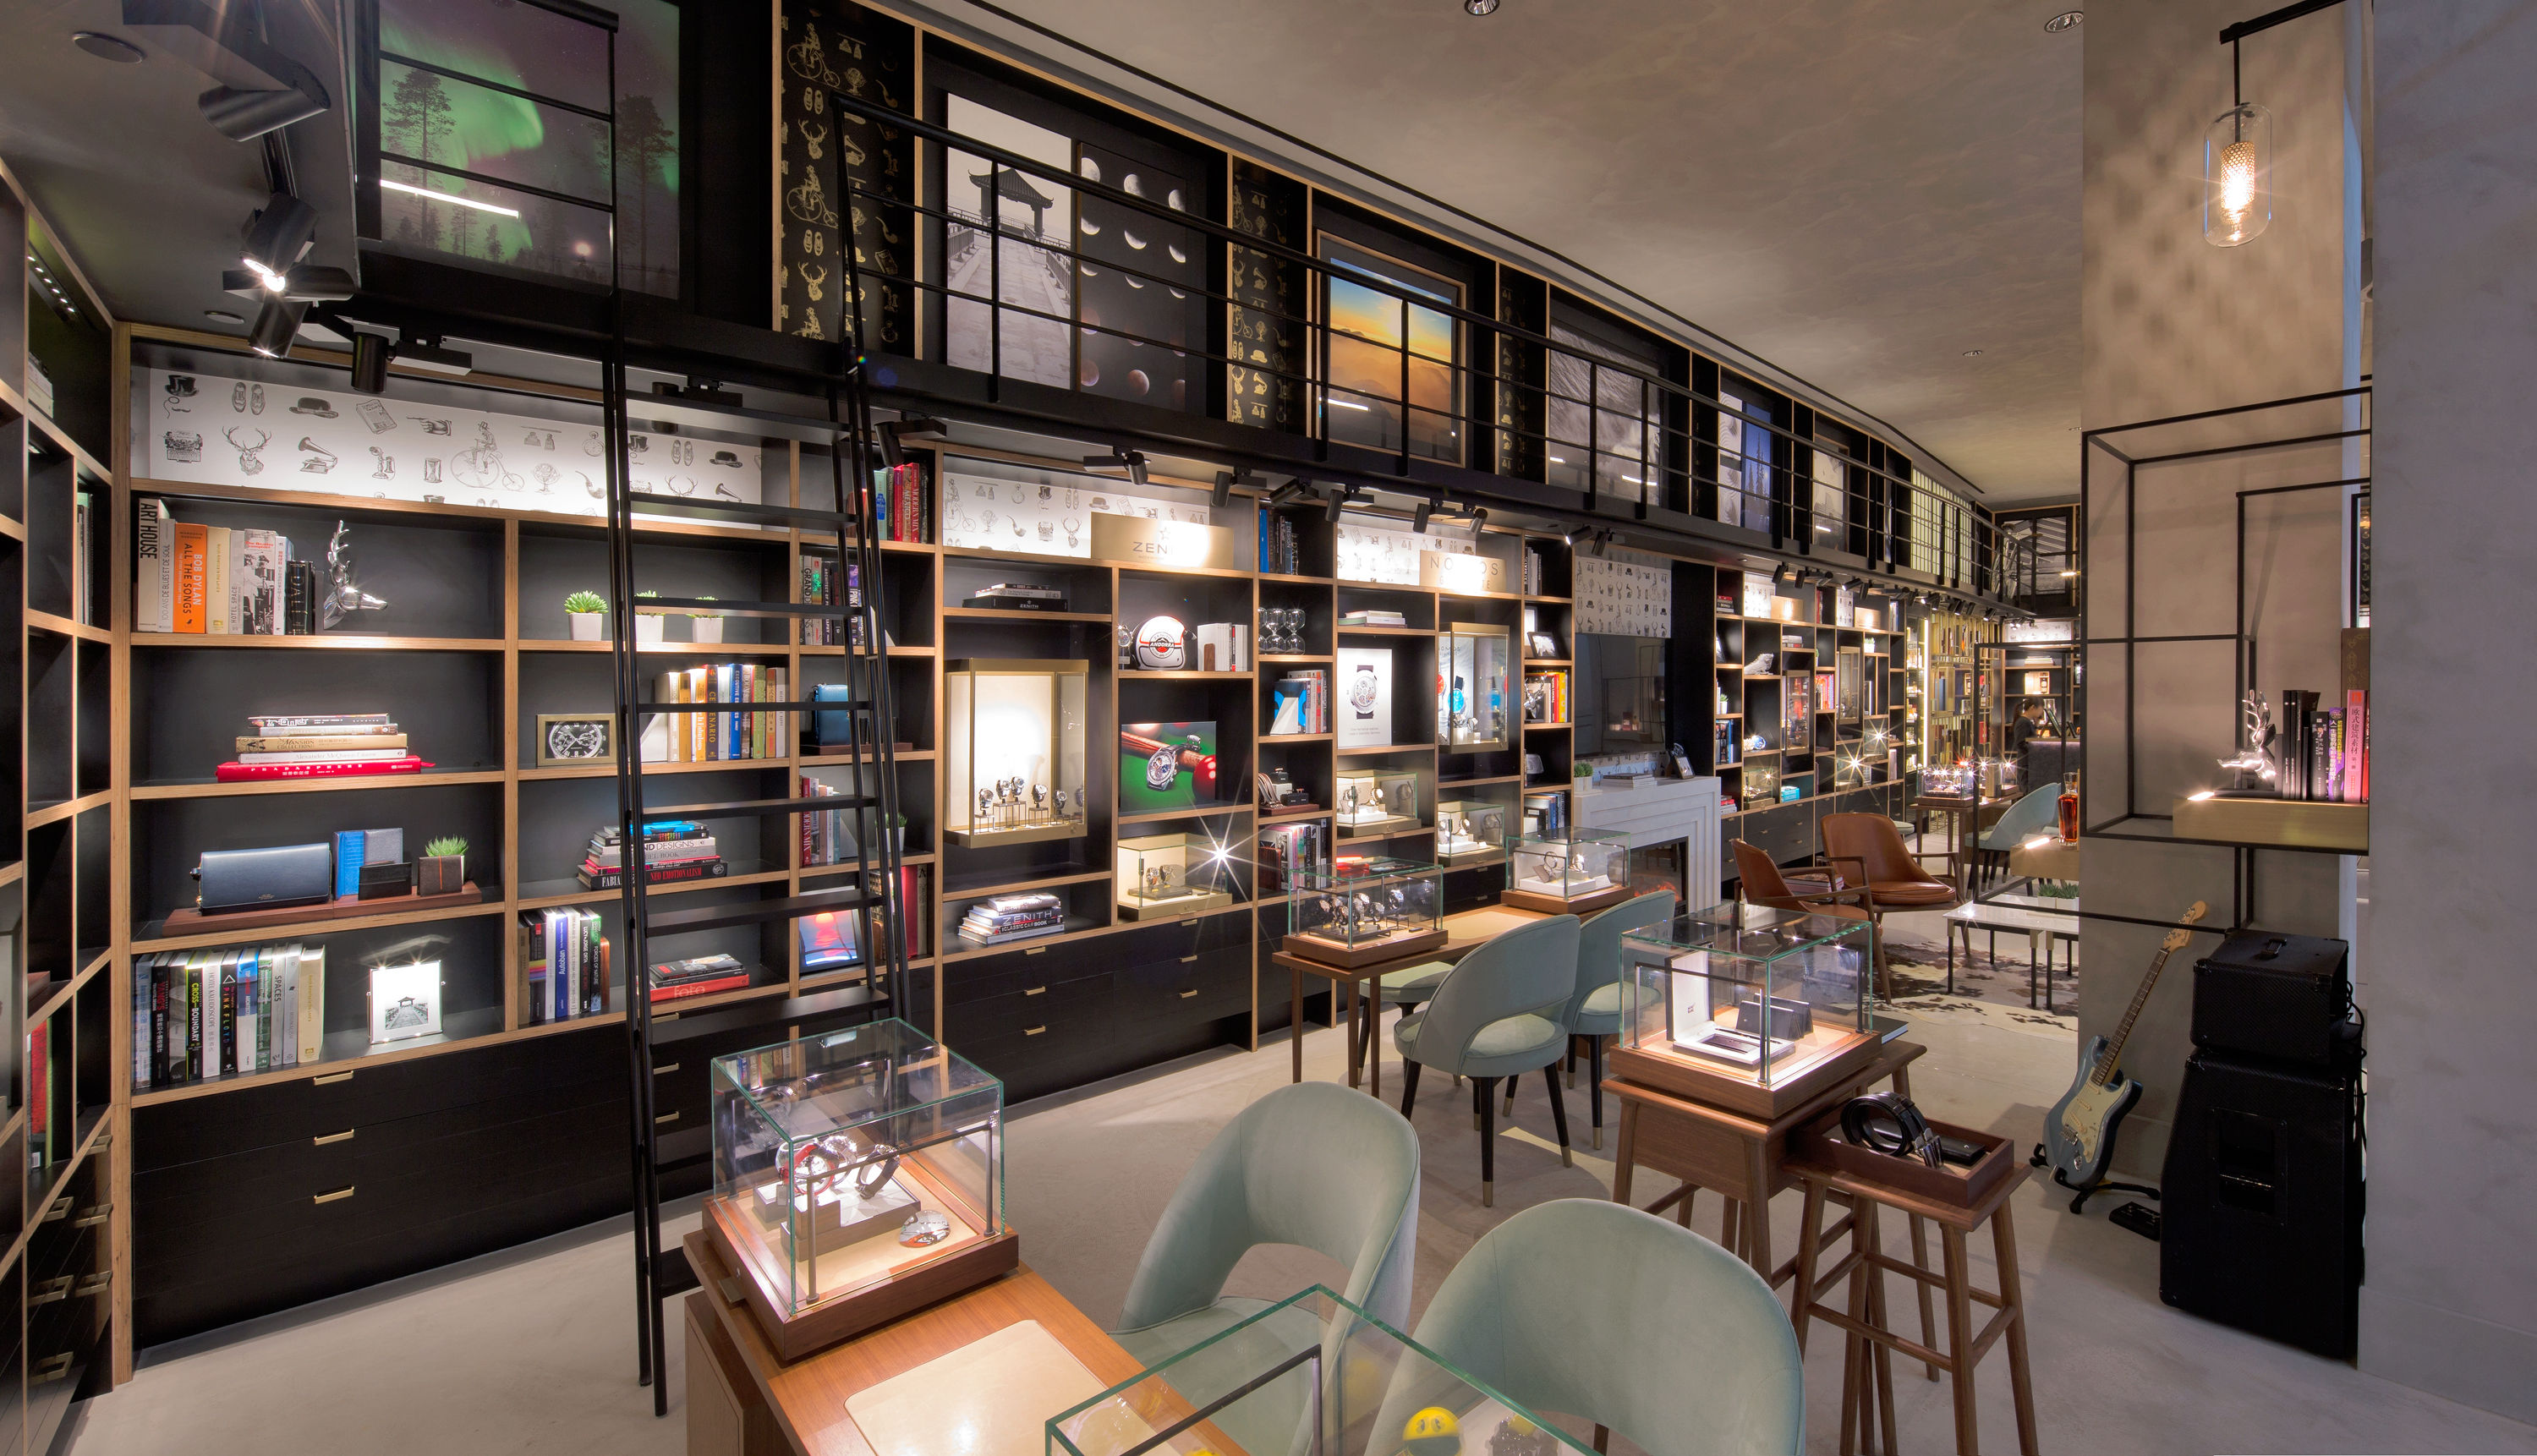 DFS unveils brand-new destination for watch & whisky lovers